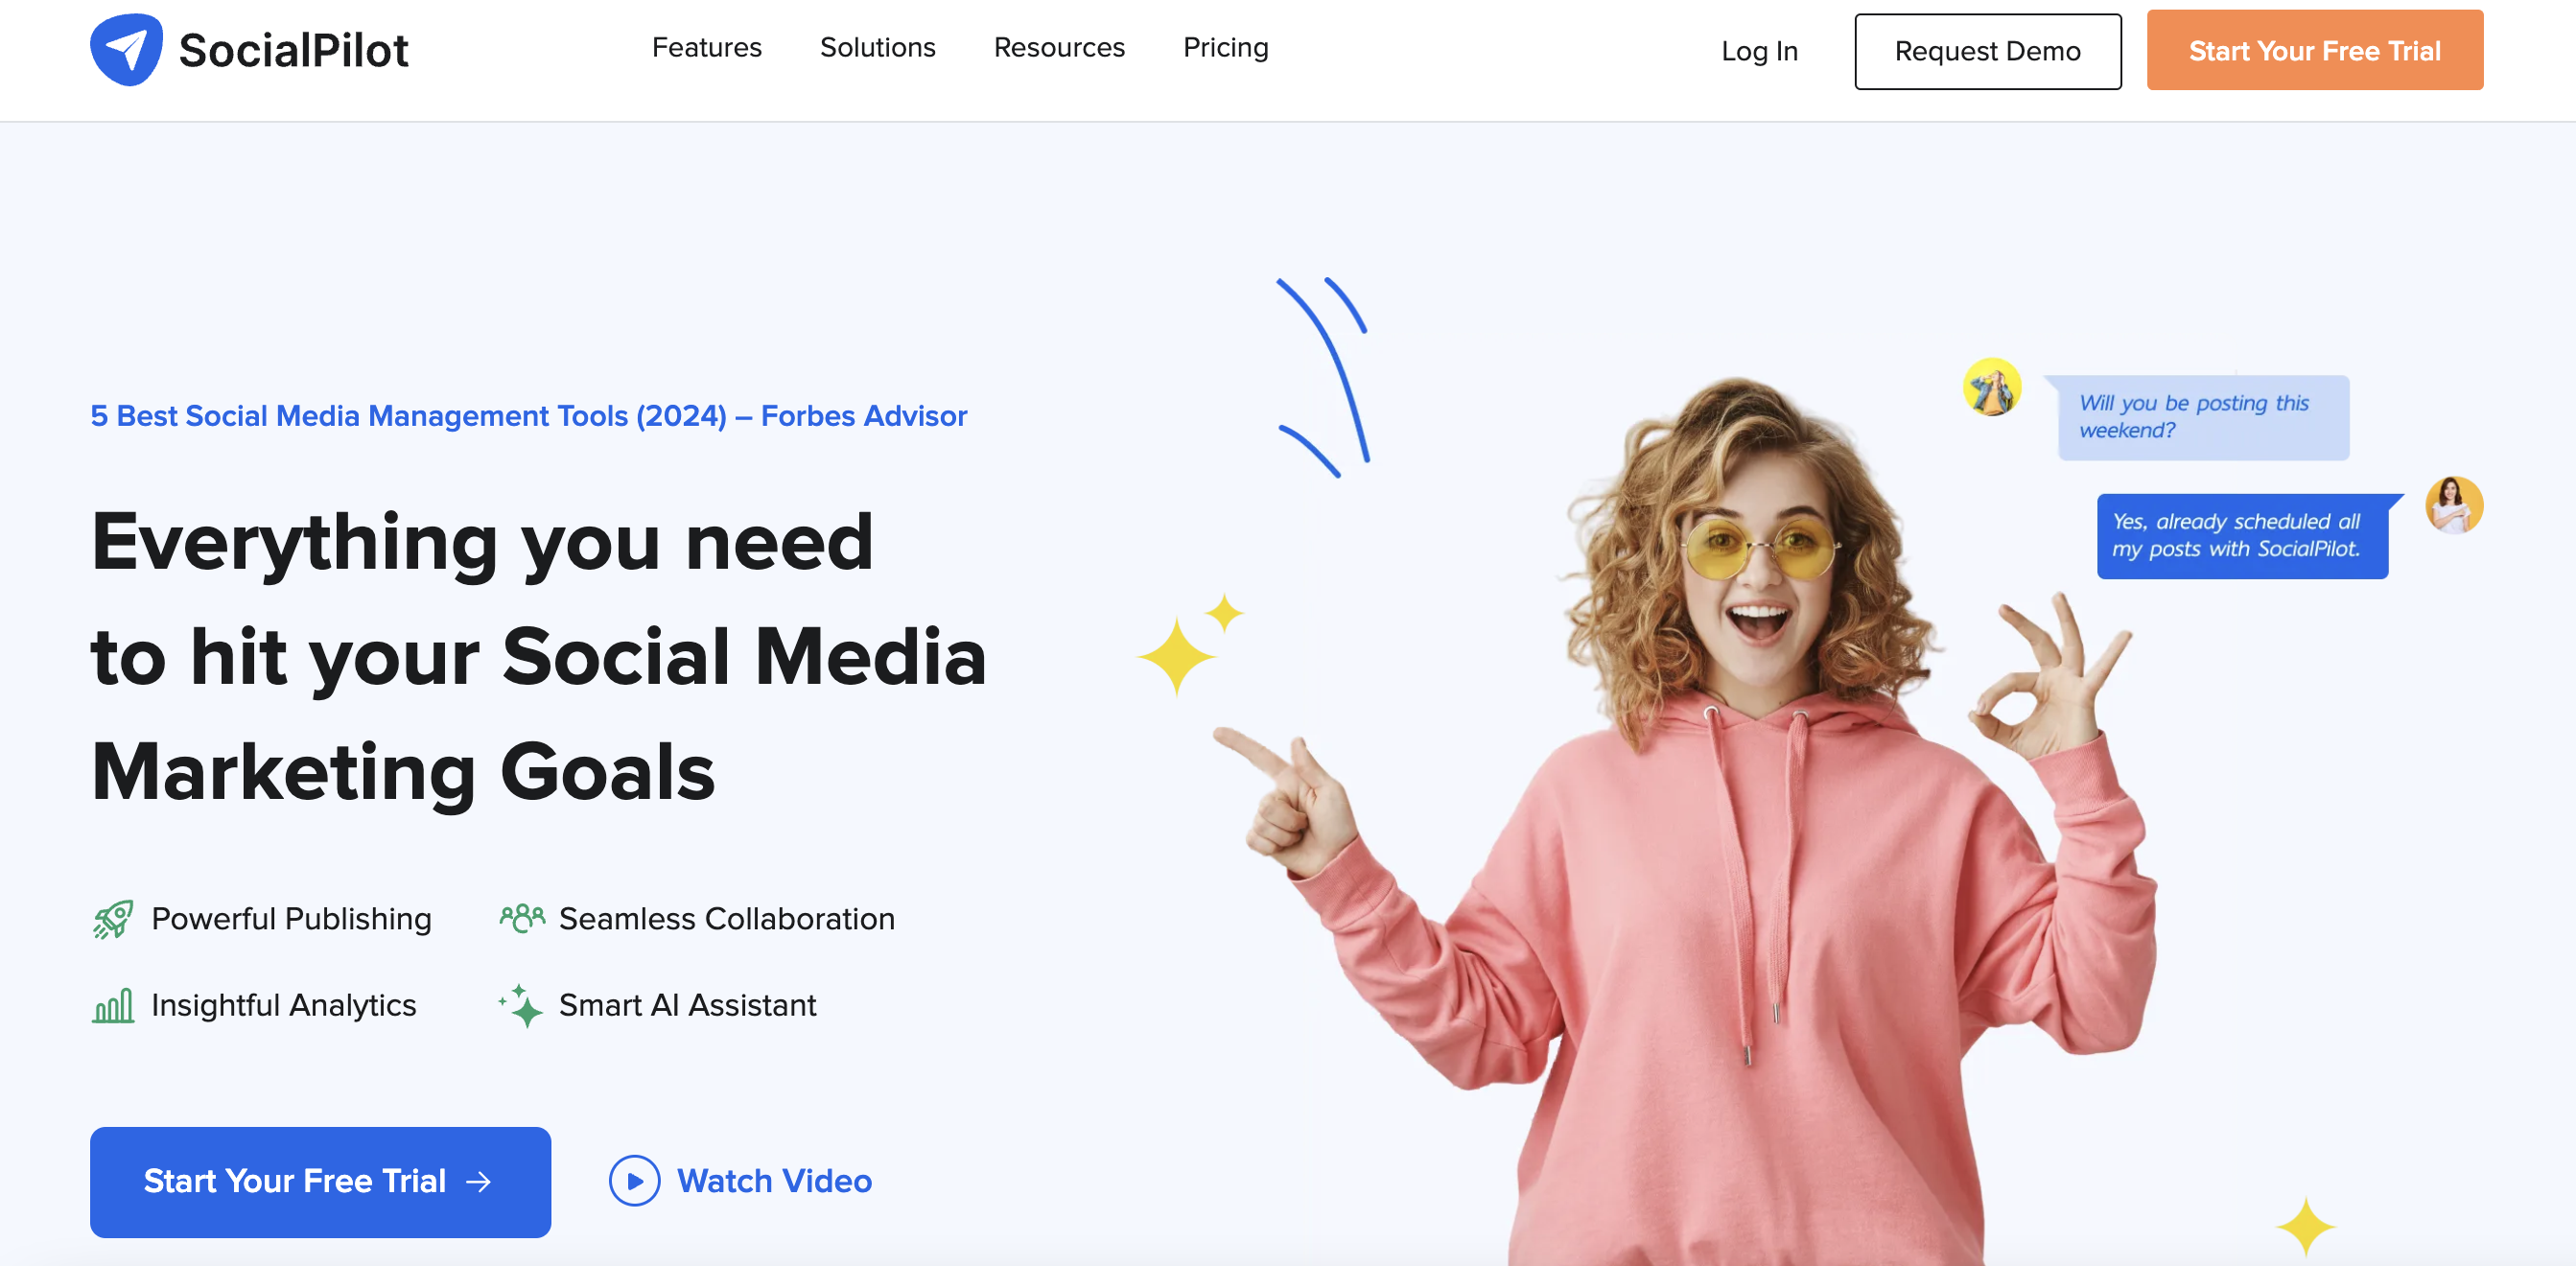 socialpilot homepage with a woman wearing a pink hoodie making an "ok" sign with one hand and another hand pointing at text that reads "everything you need to hit your social media marketing goals" 